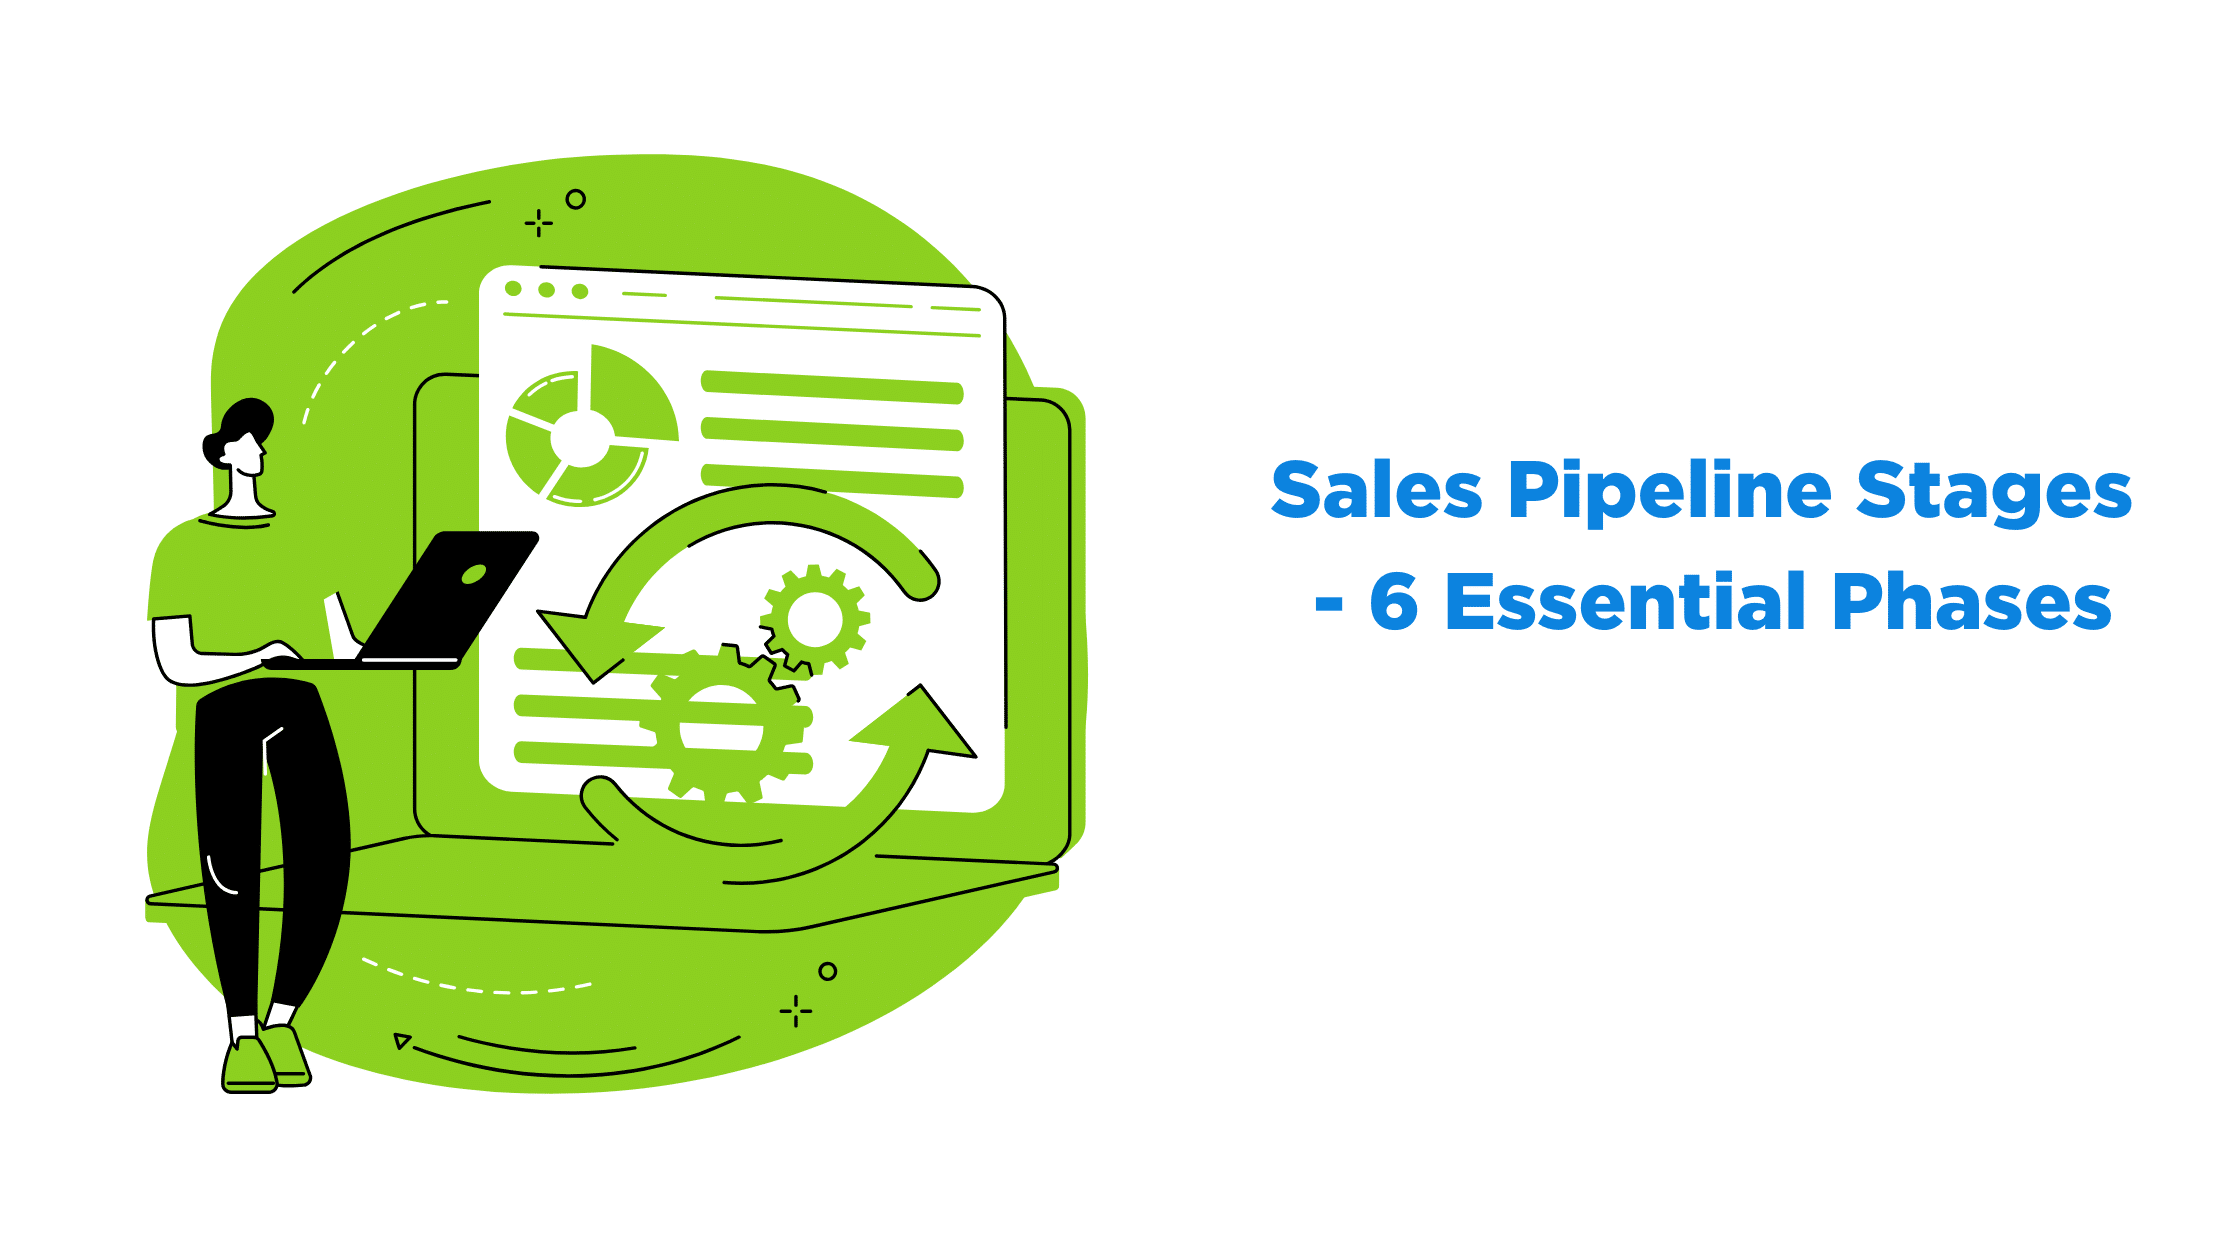 Sales Pipeline Stages - 6 Essential Phases